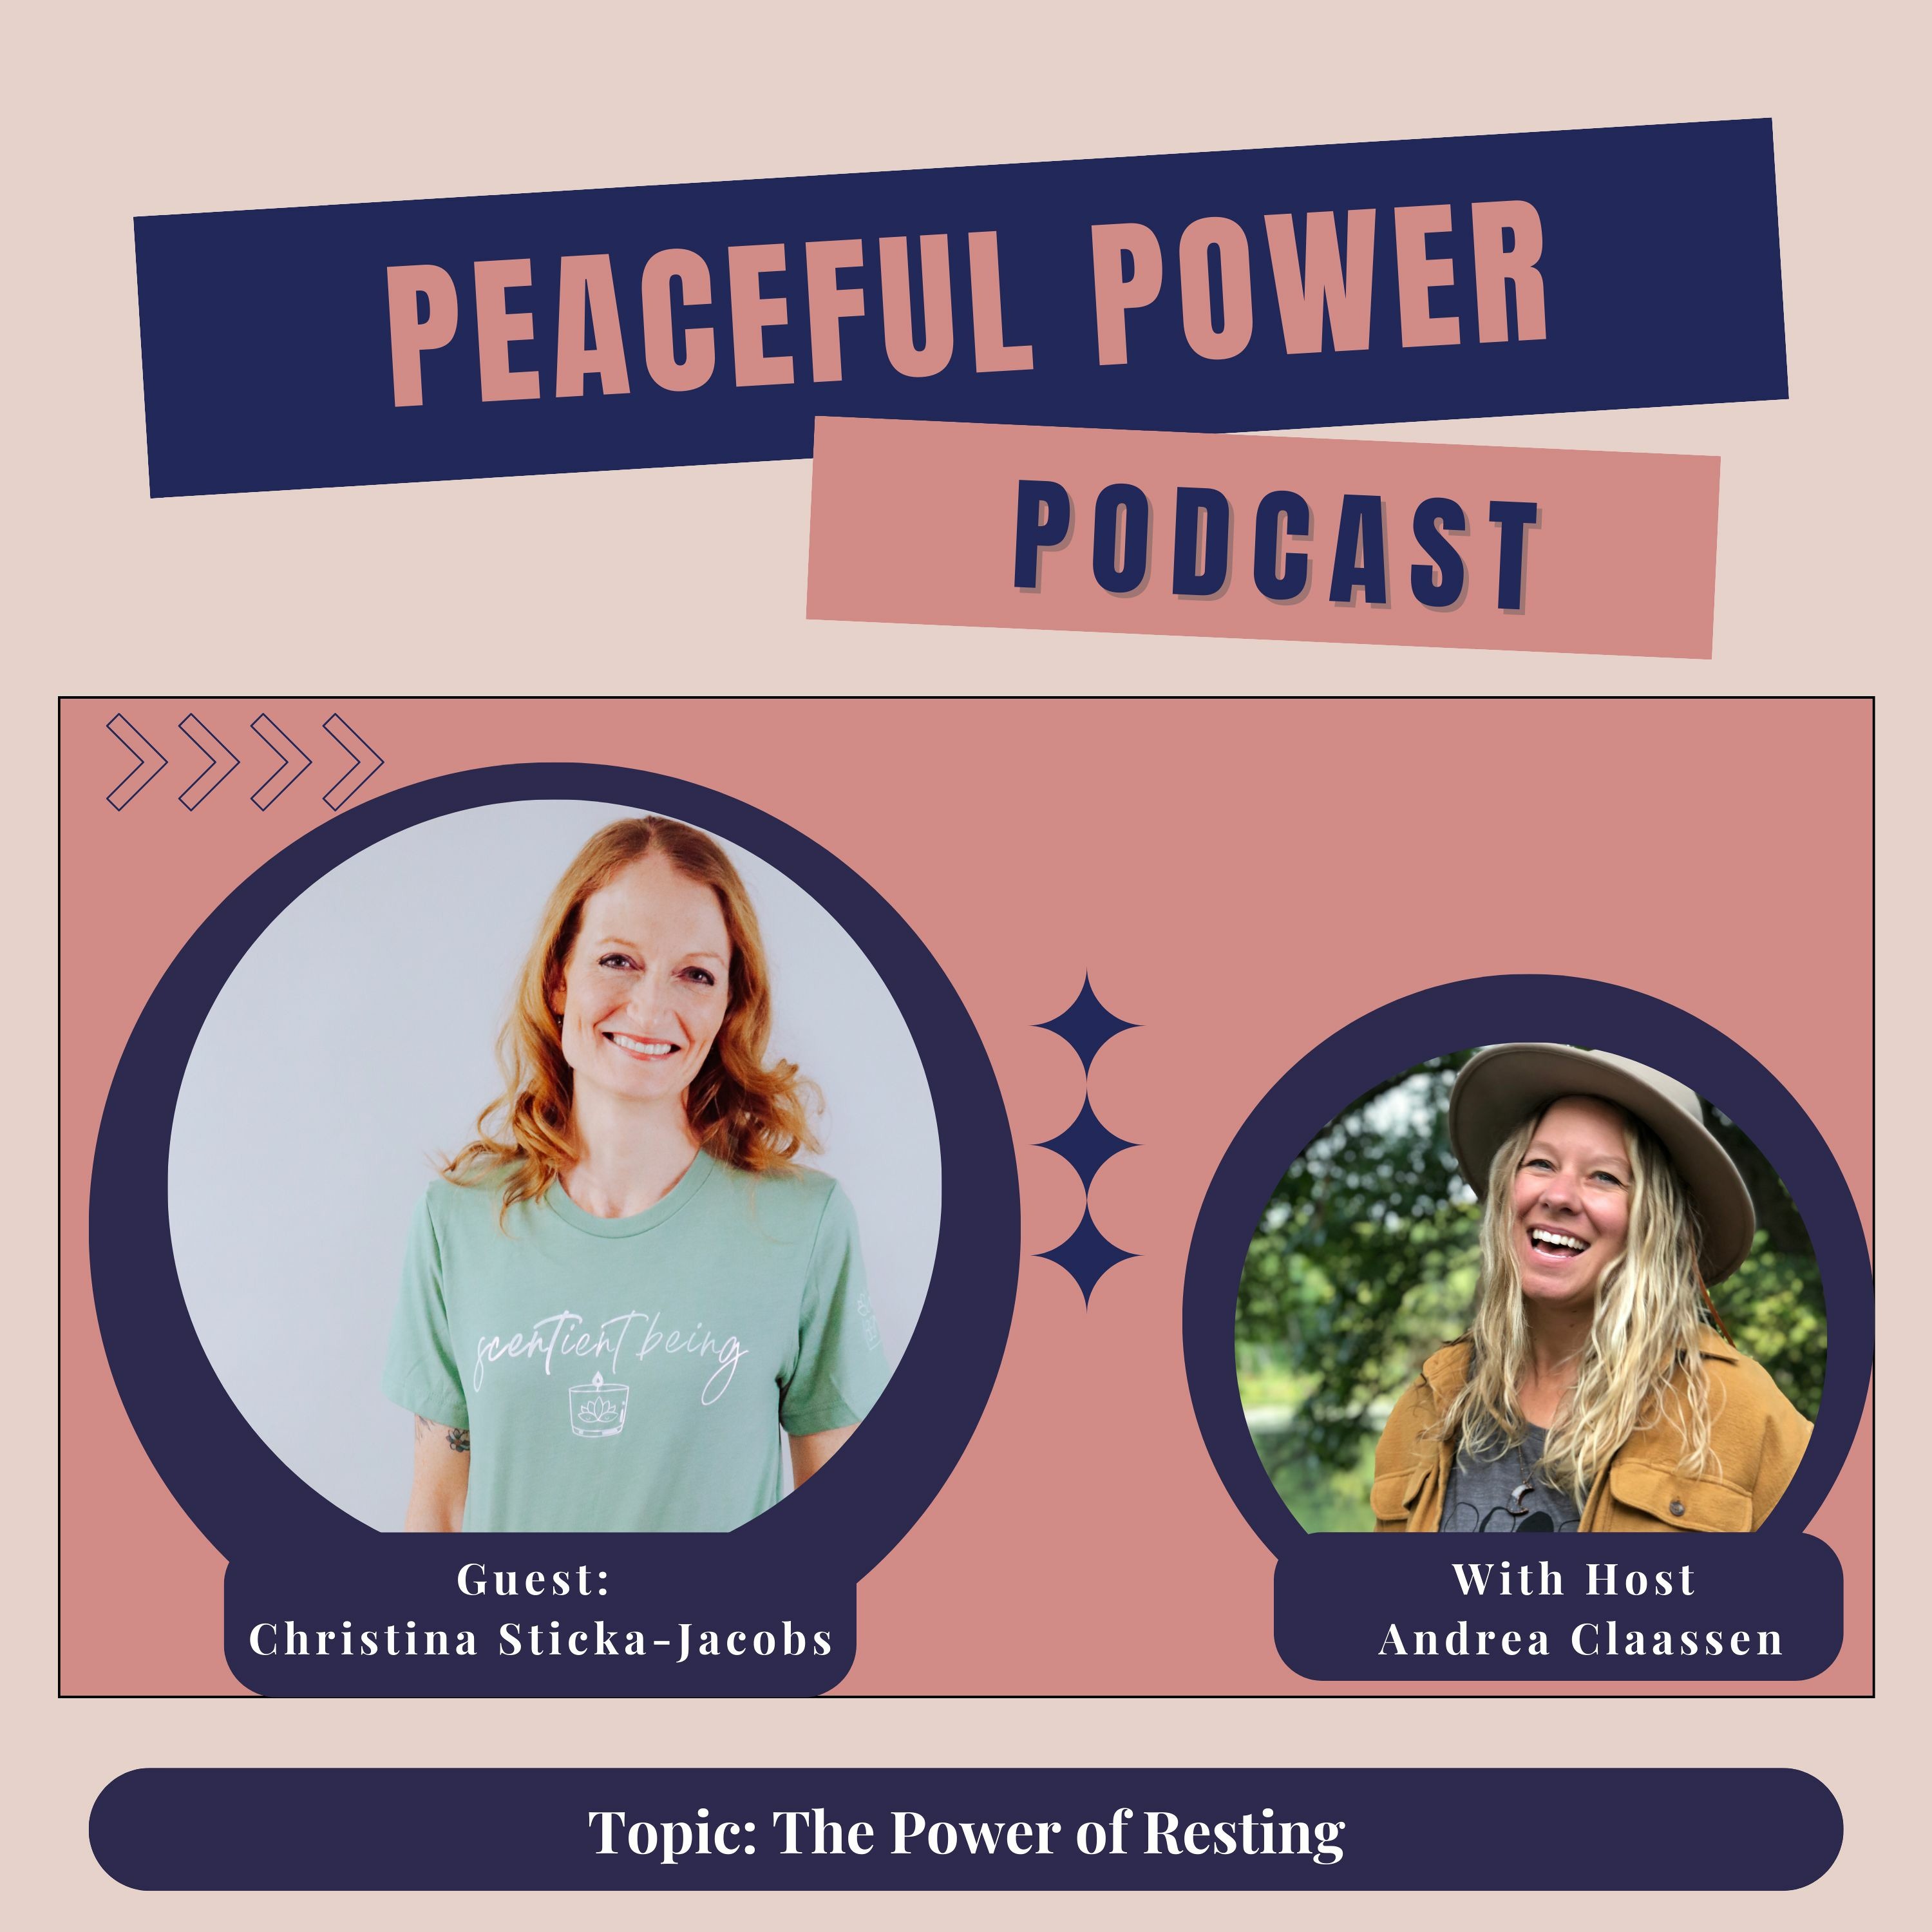 Christina Sticka-Jacobs on the Power of Resting